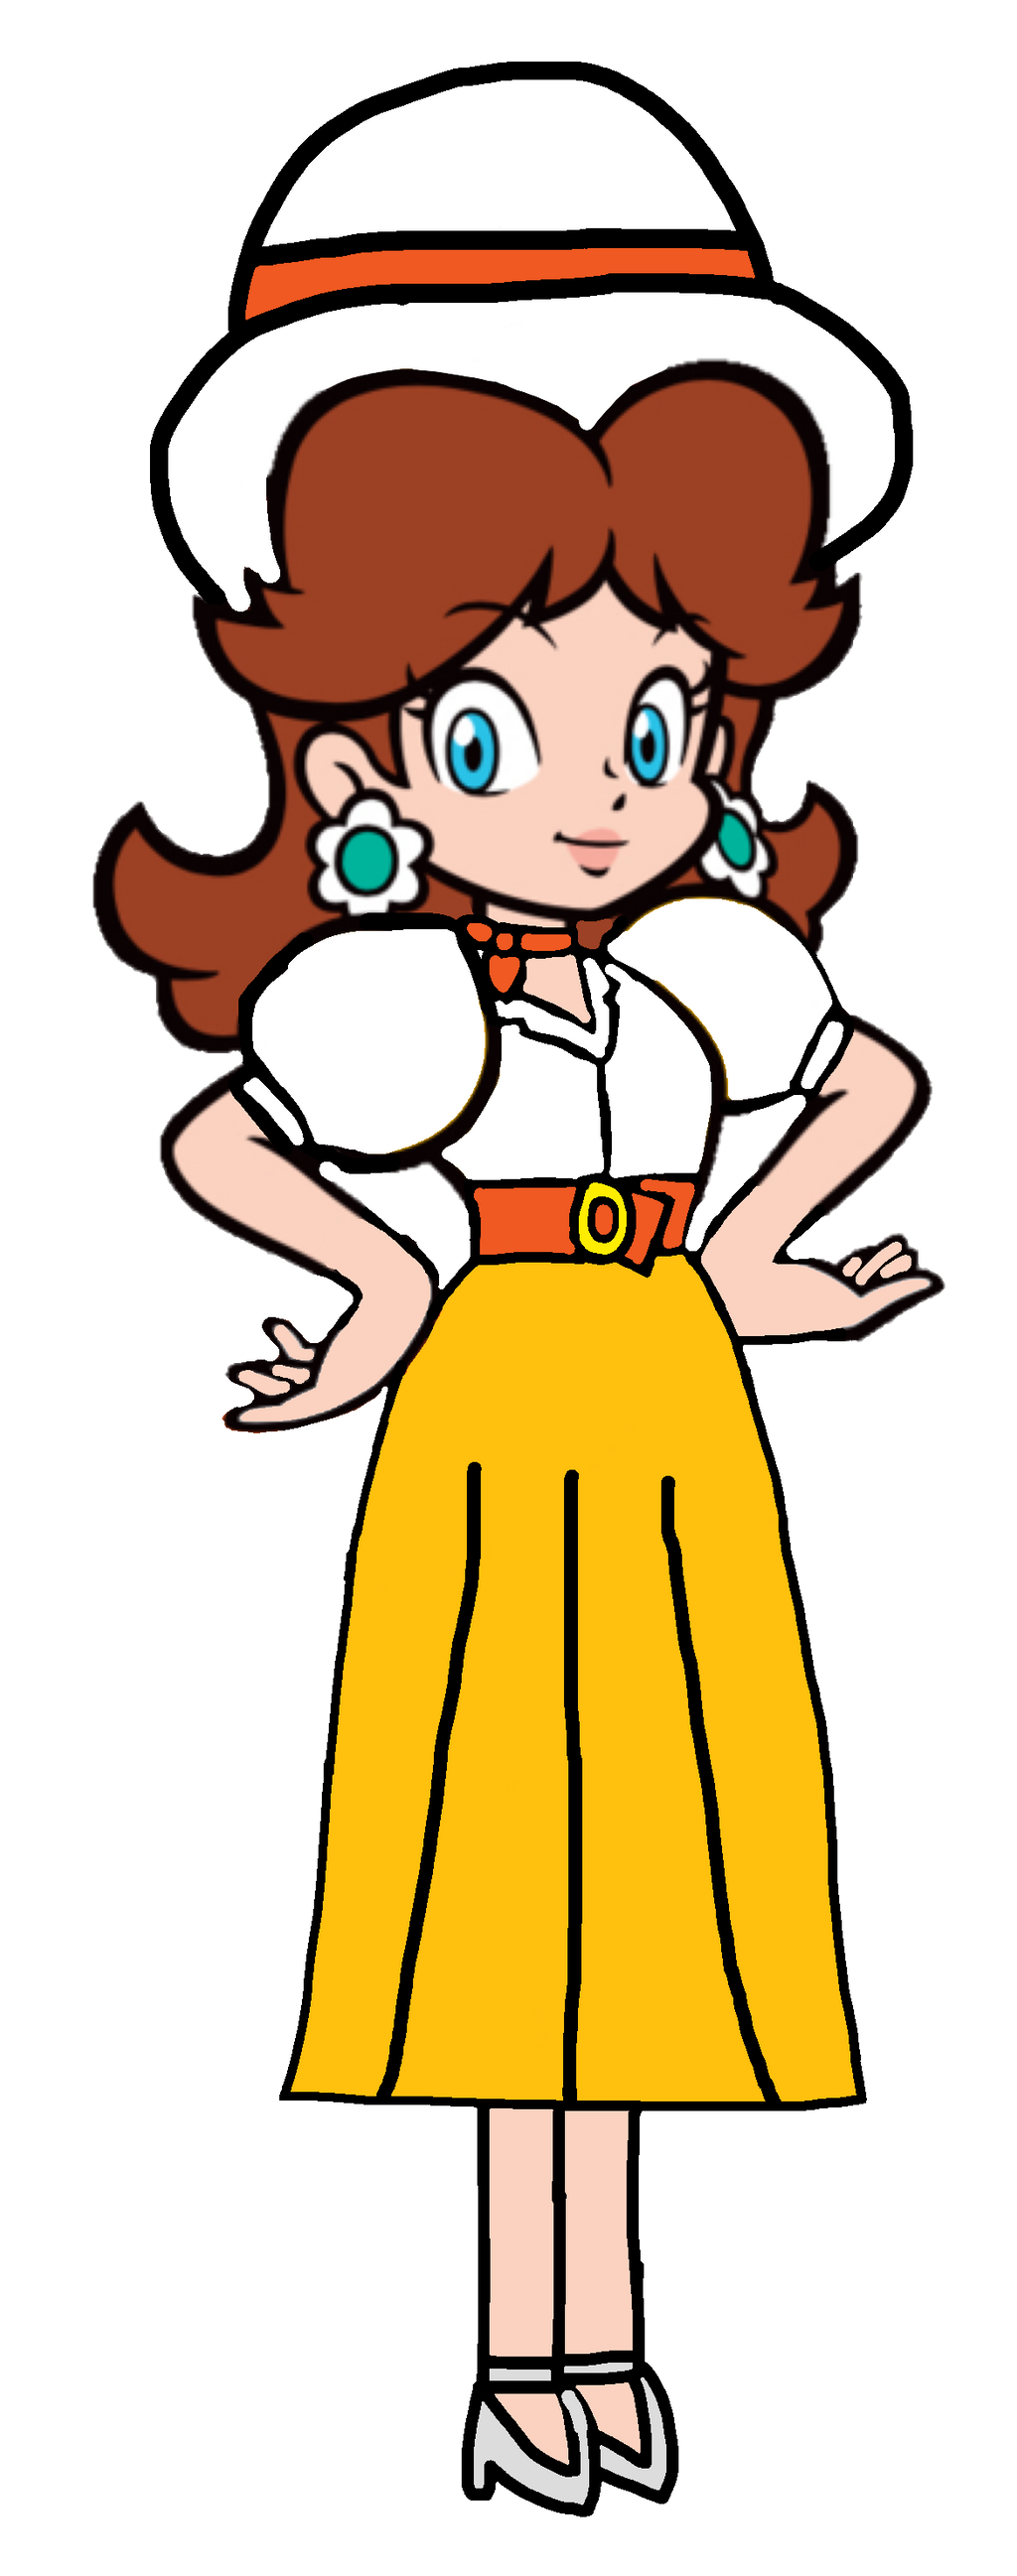 Super Mario: Princess Daisy Travel Outfit 2D by Joshuat1306 on